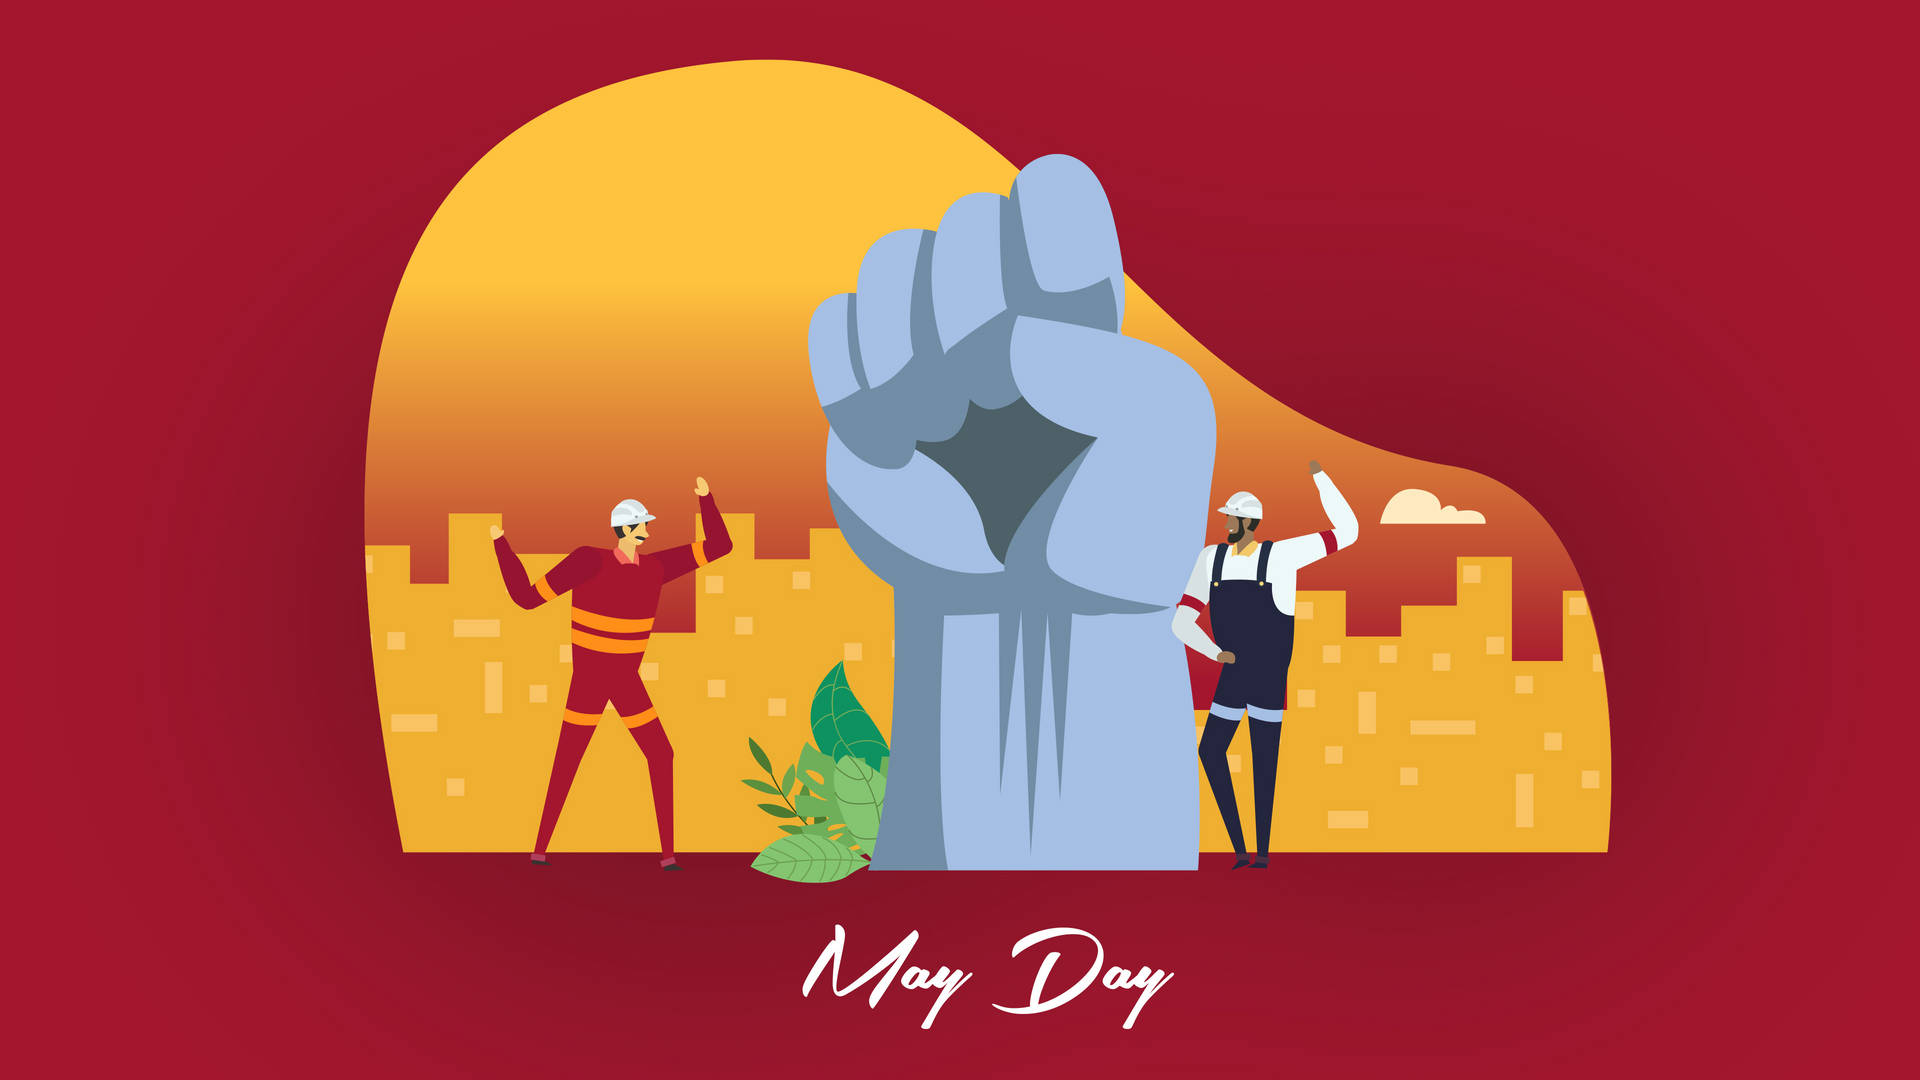 Gold And Red May Day Wallpaper